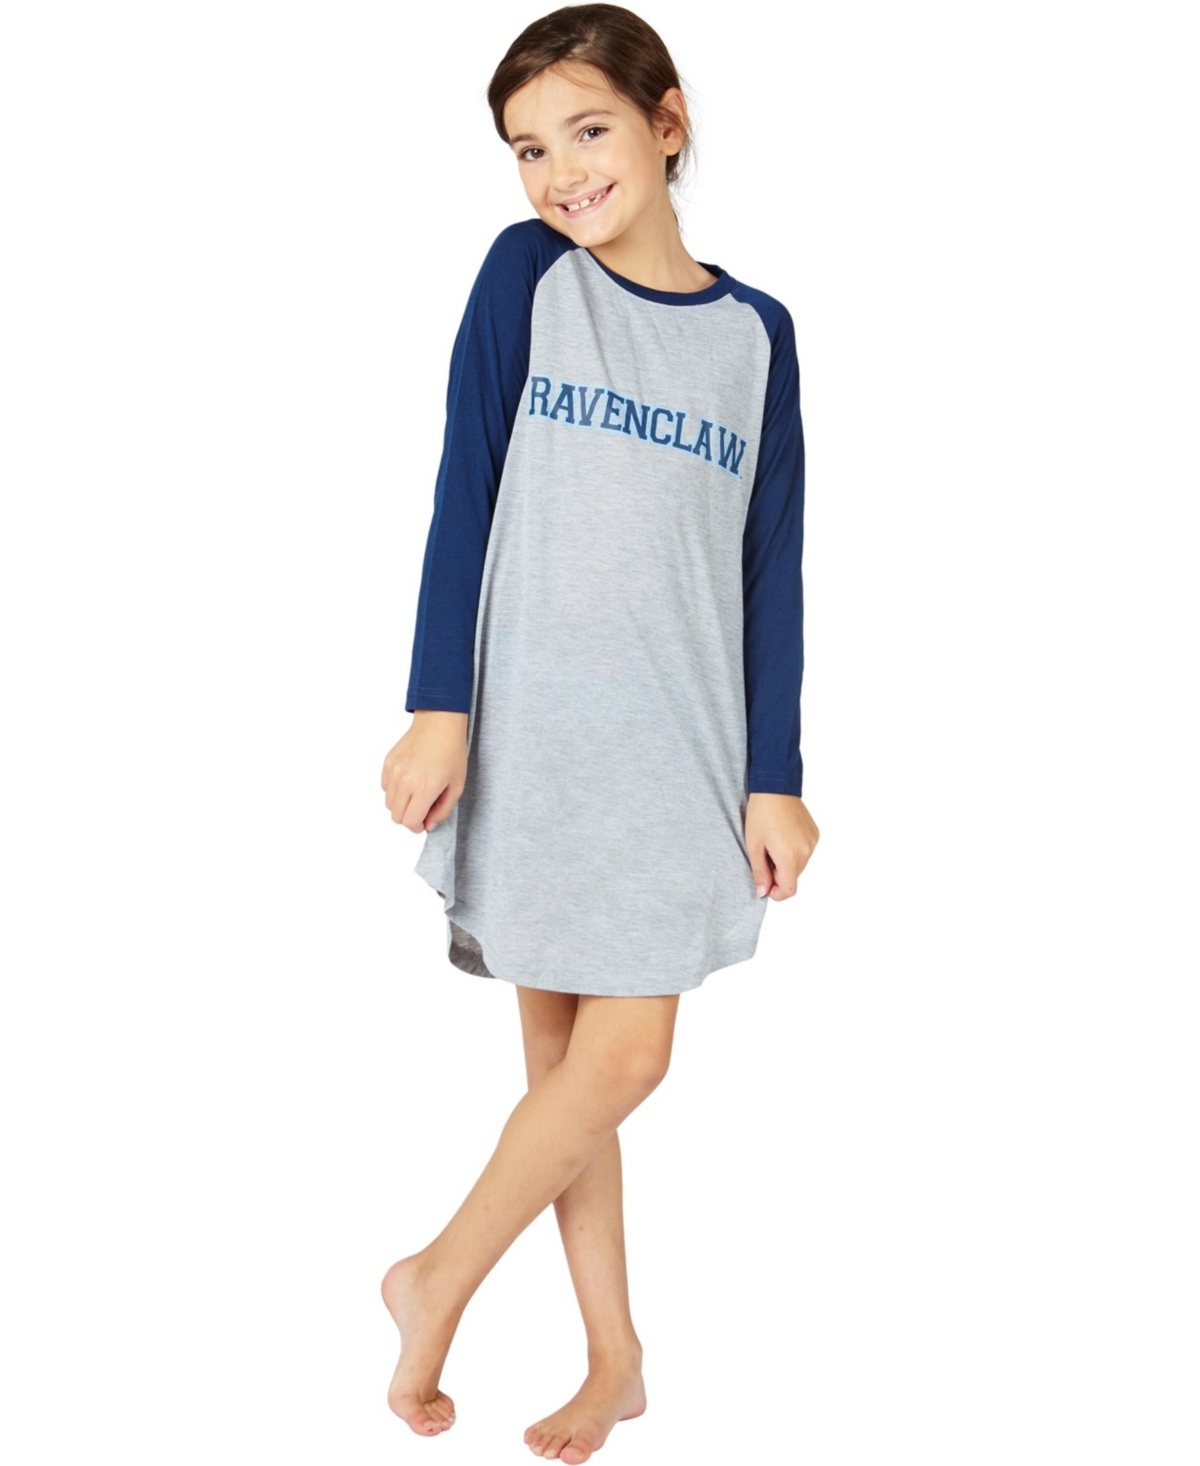 Harry Potter Girls Pajama Top Kids Nightgown In Ravenclaw